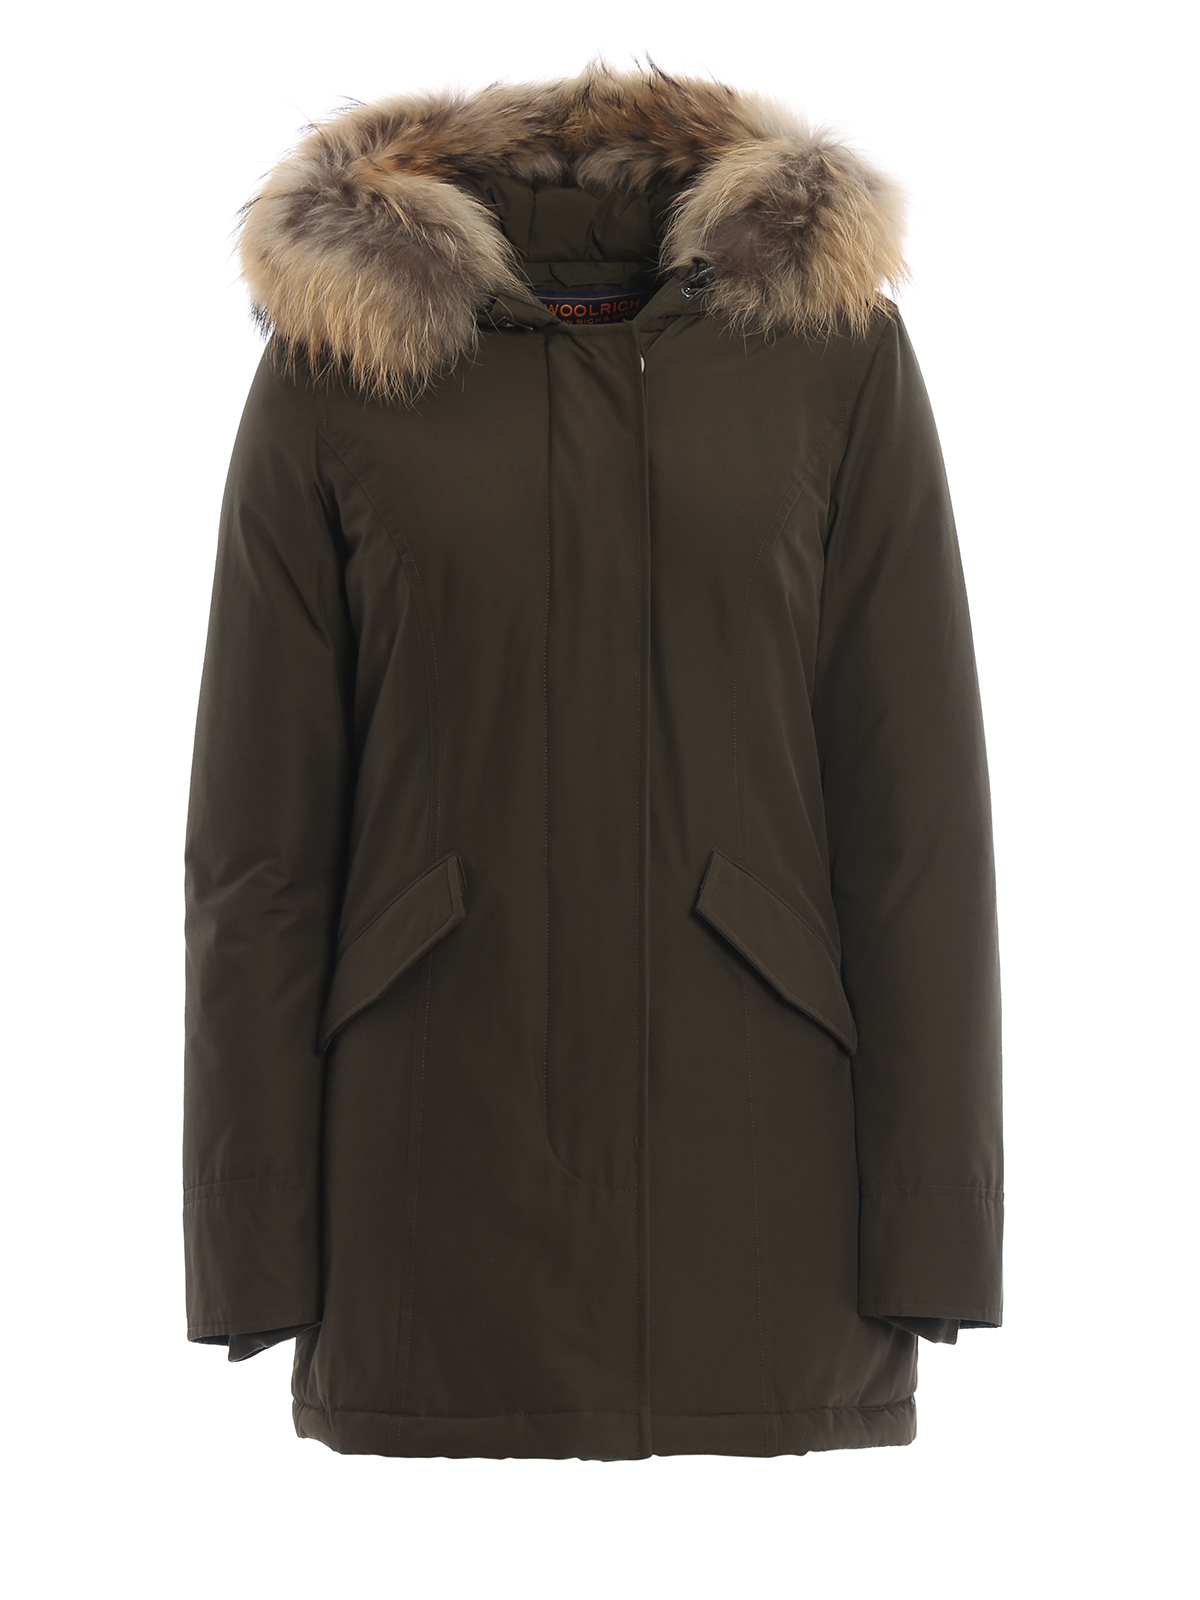 Woolrich - Arctic Parka army green padded coat - padded coats ...